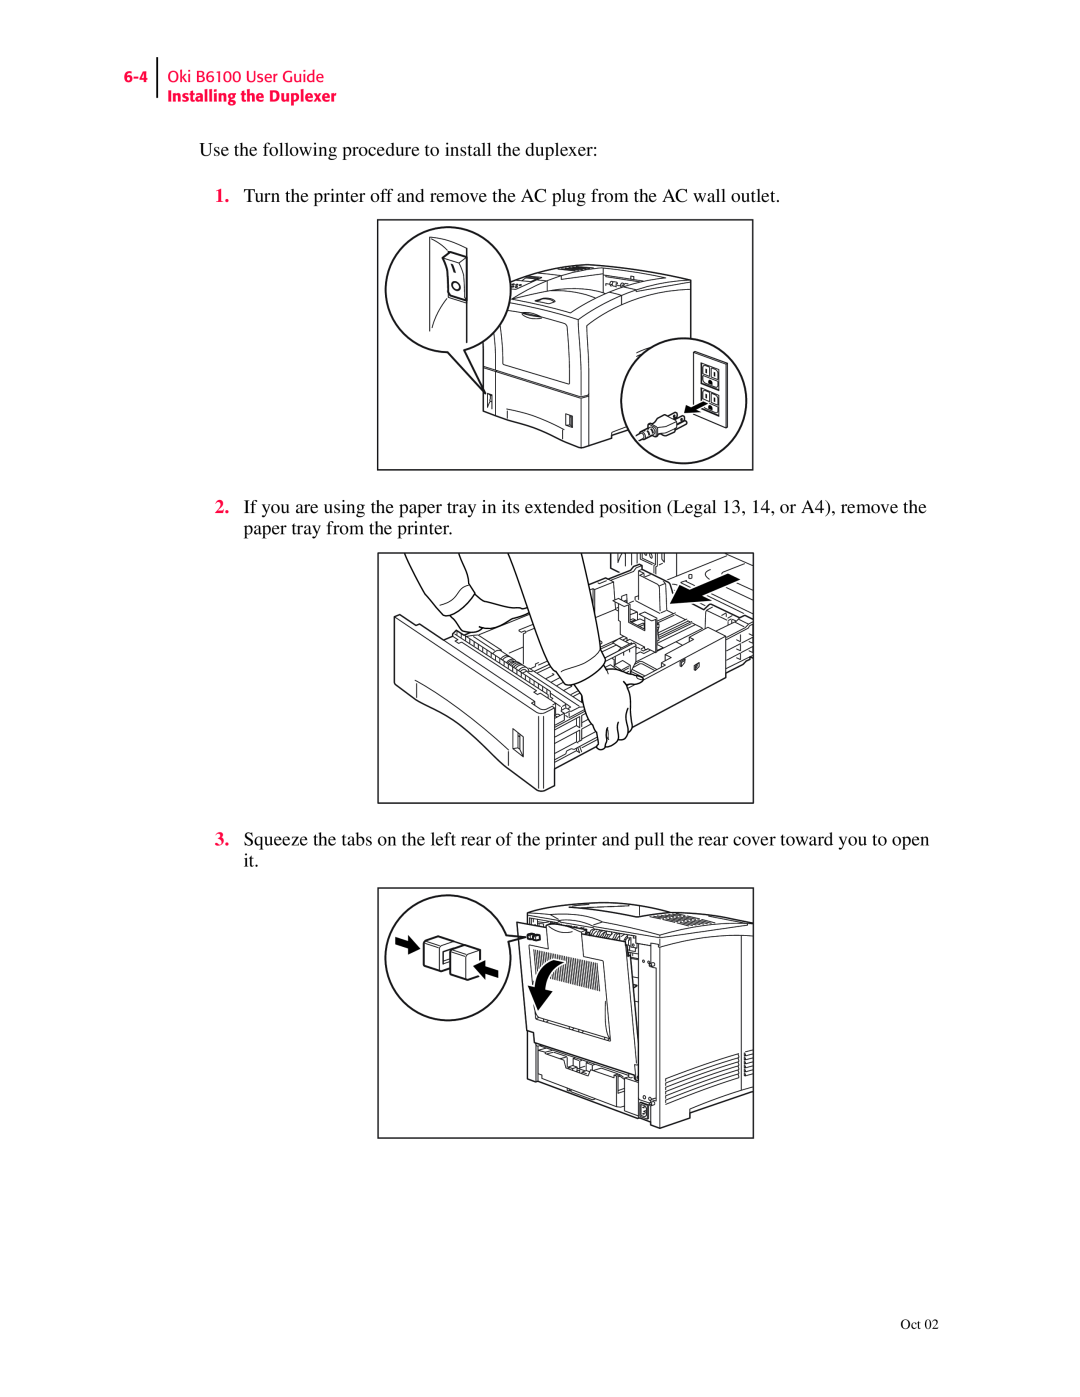 Oki manual Use the following procedure to install the duplexer, Oki B6100 User Guide Installing the Duplexer 